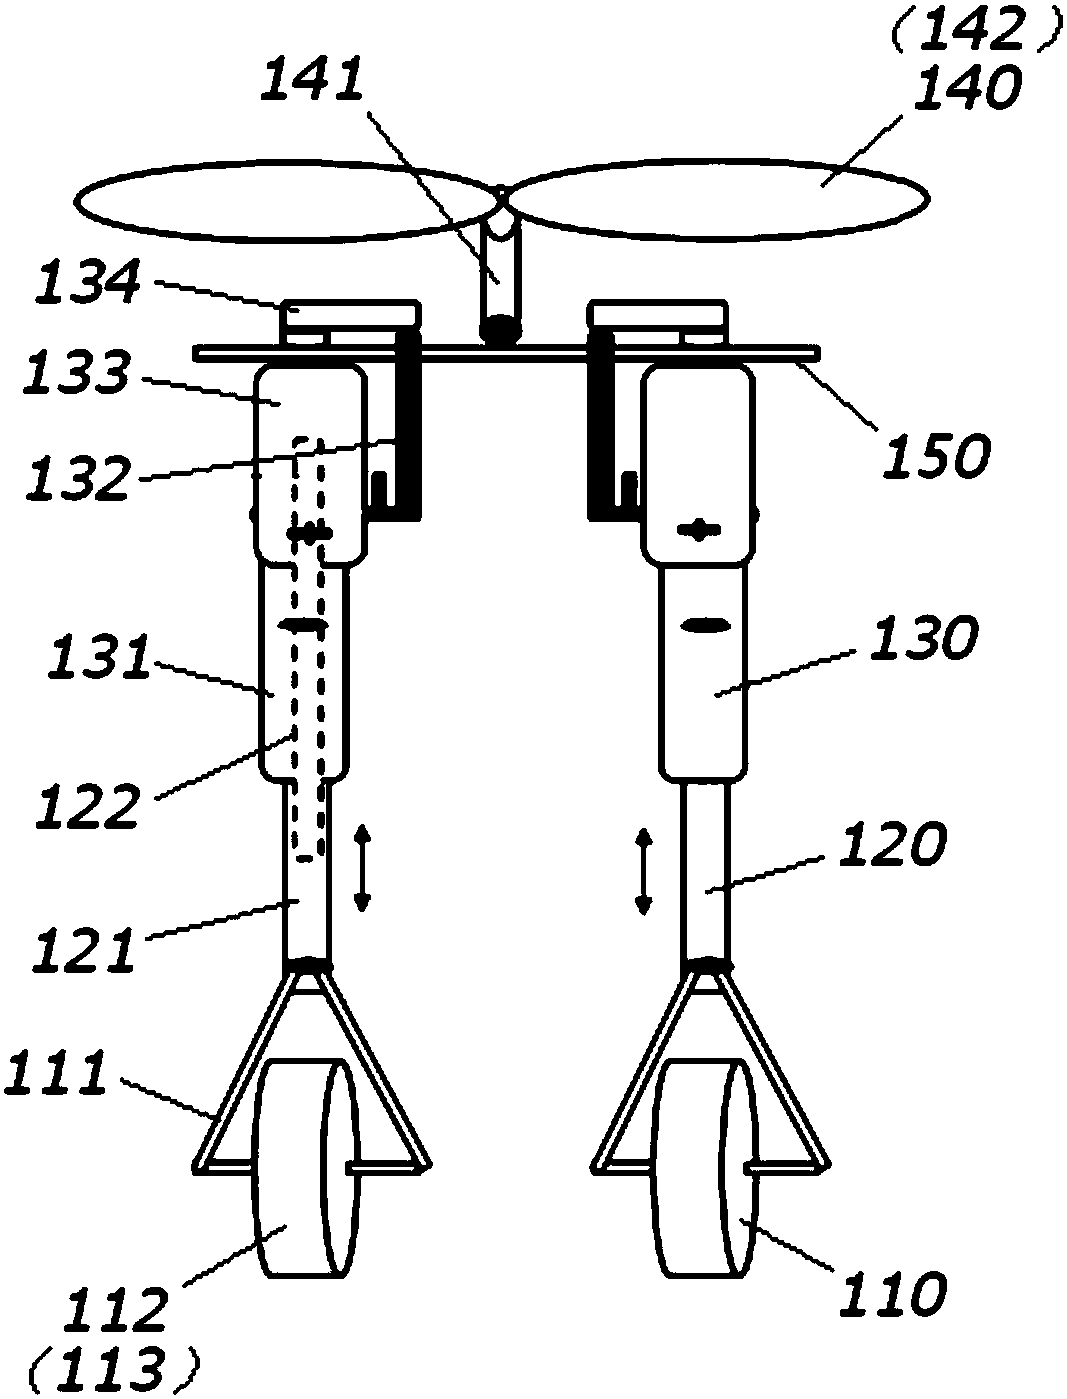 Single-rotor-wing wheel foot type robot applied in multiple occasions